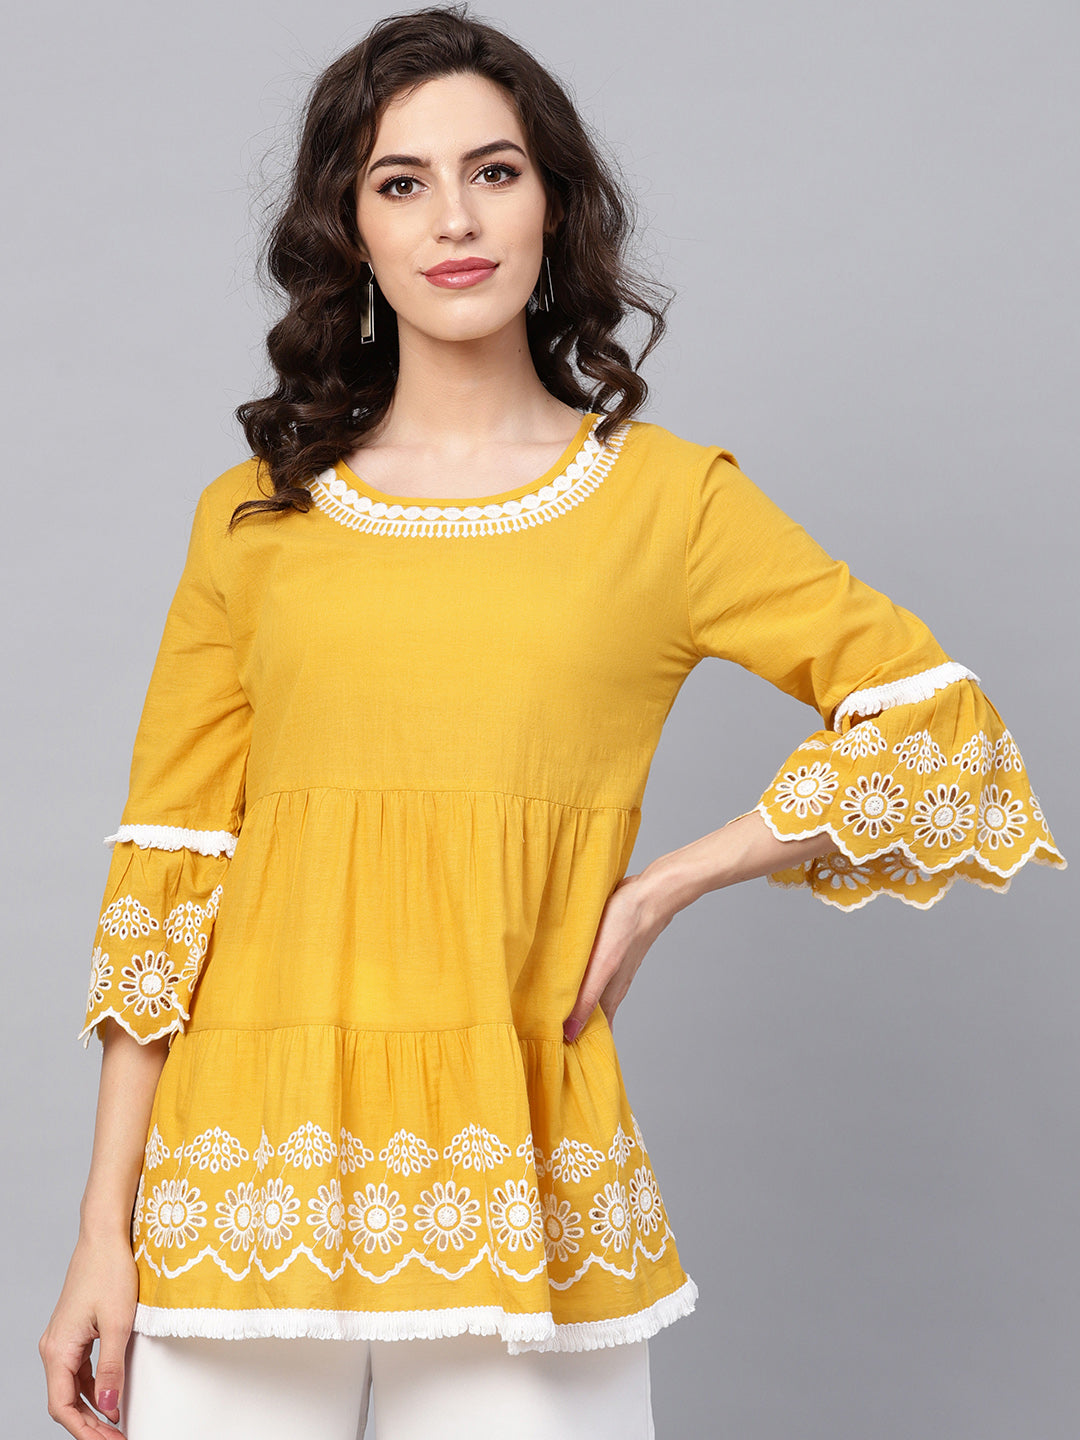 Bhama Couture Mustard Yellow & White Embroidered Cotton Top